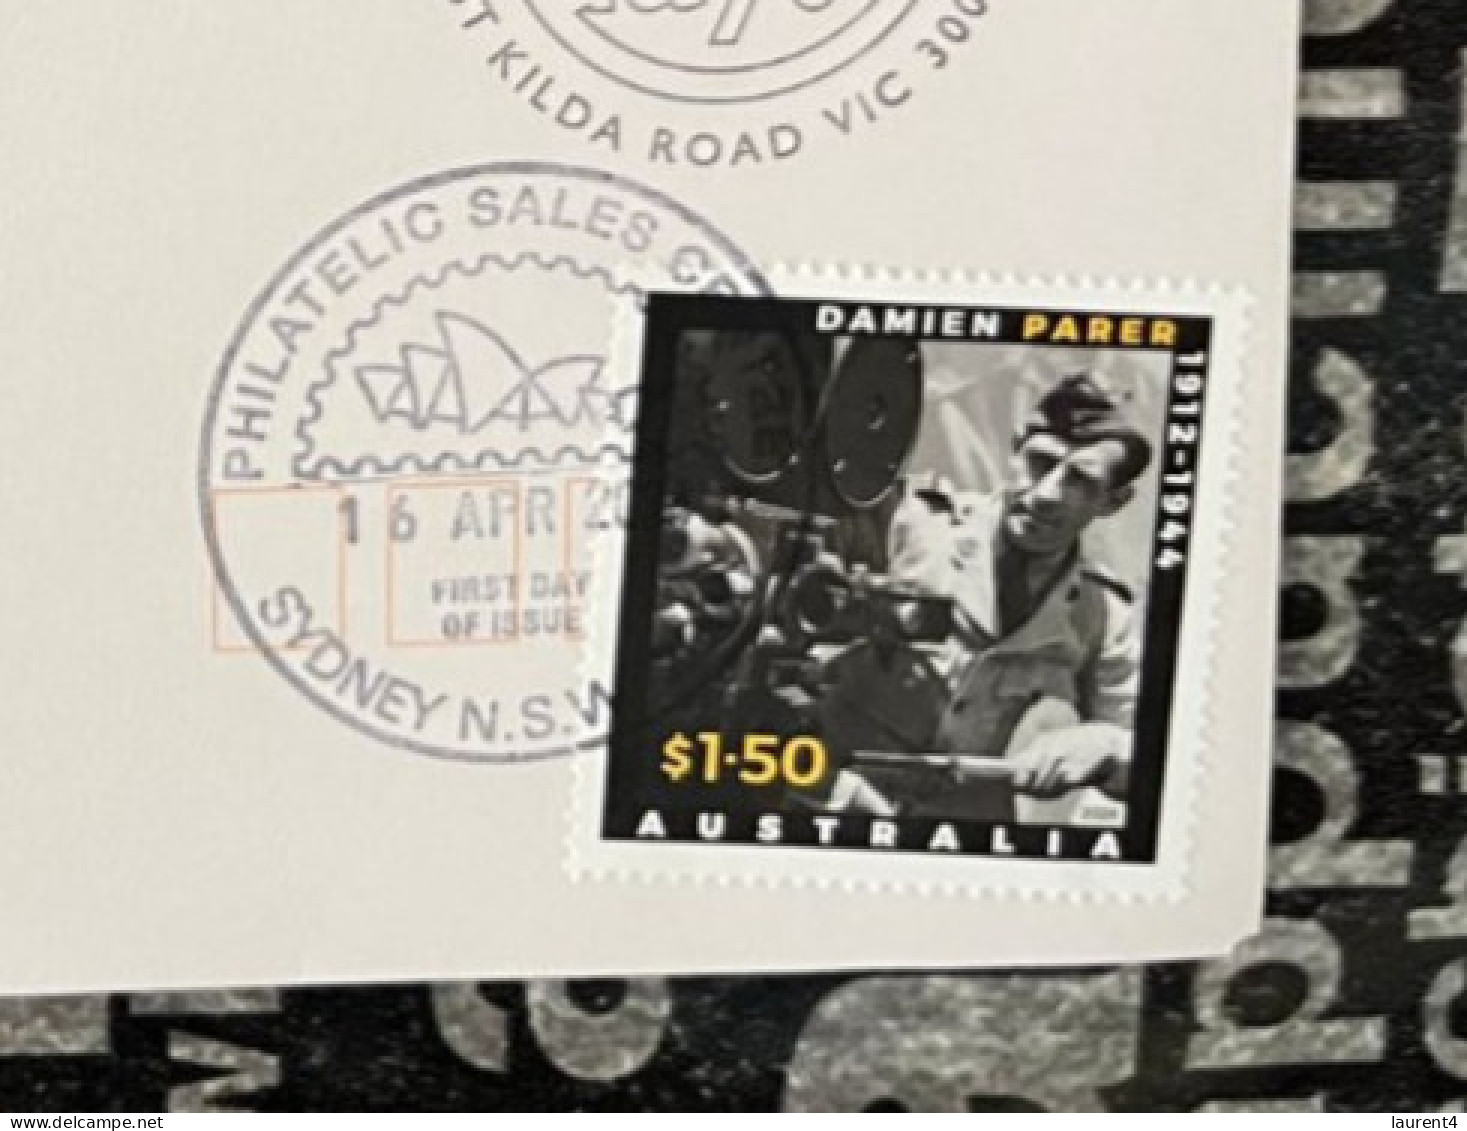 16-4-2024 (4 X 22) Australia ANZAC 2024 - New Stamp Issued 16-4-2024 (on 1995 Over-printed Cover) - Premiers Jours (FDC)